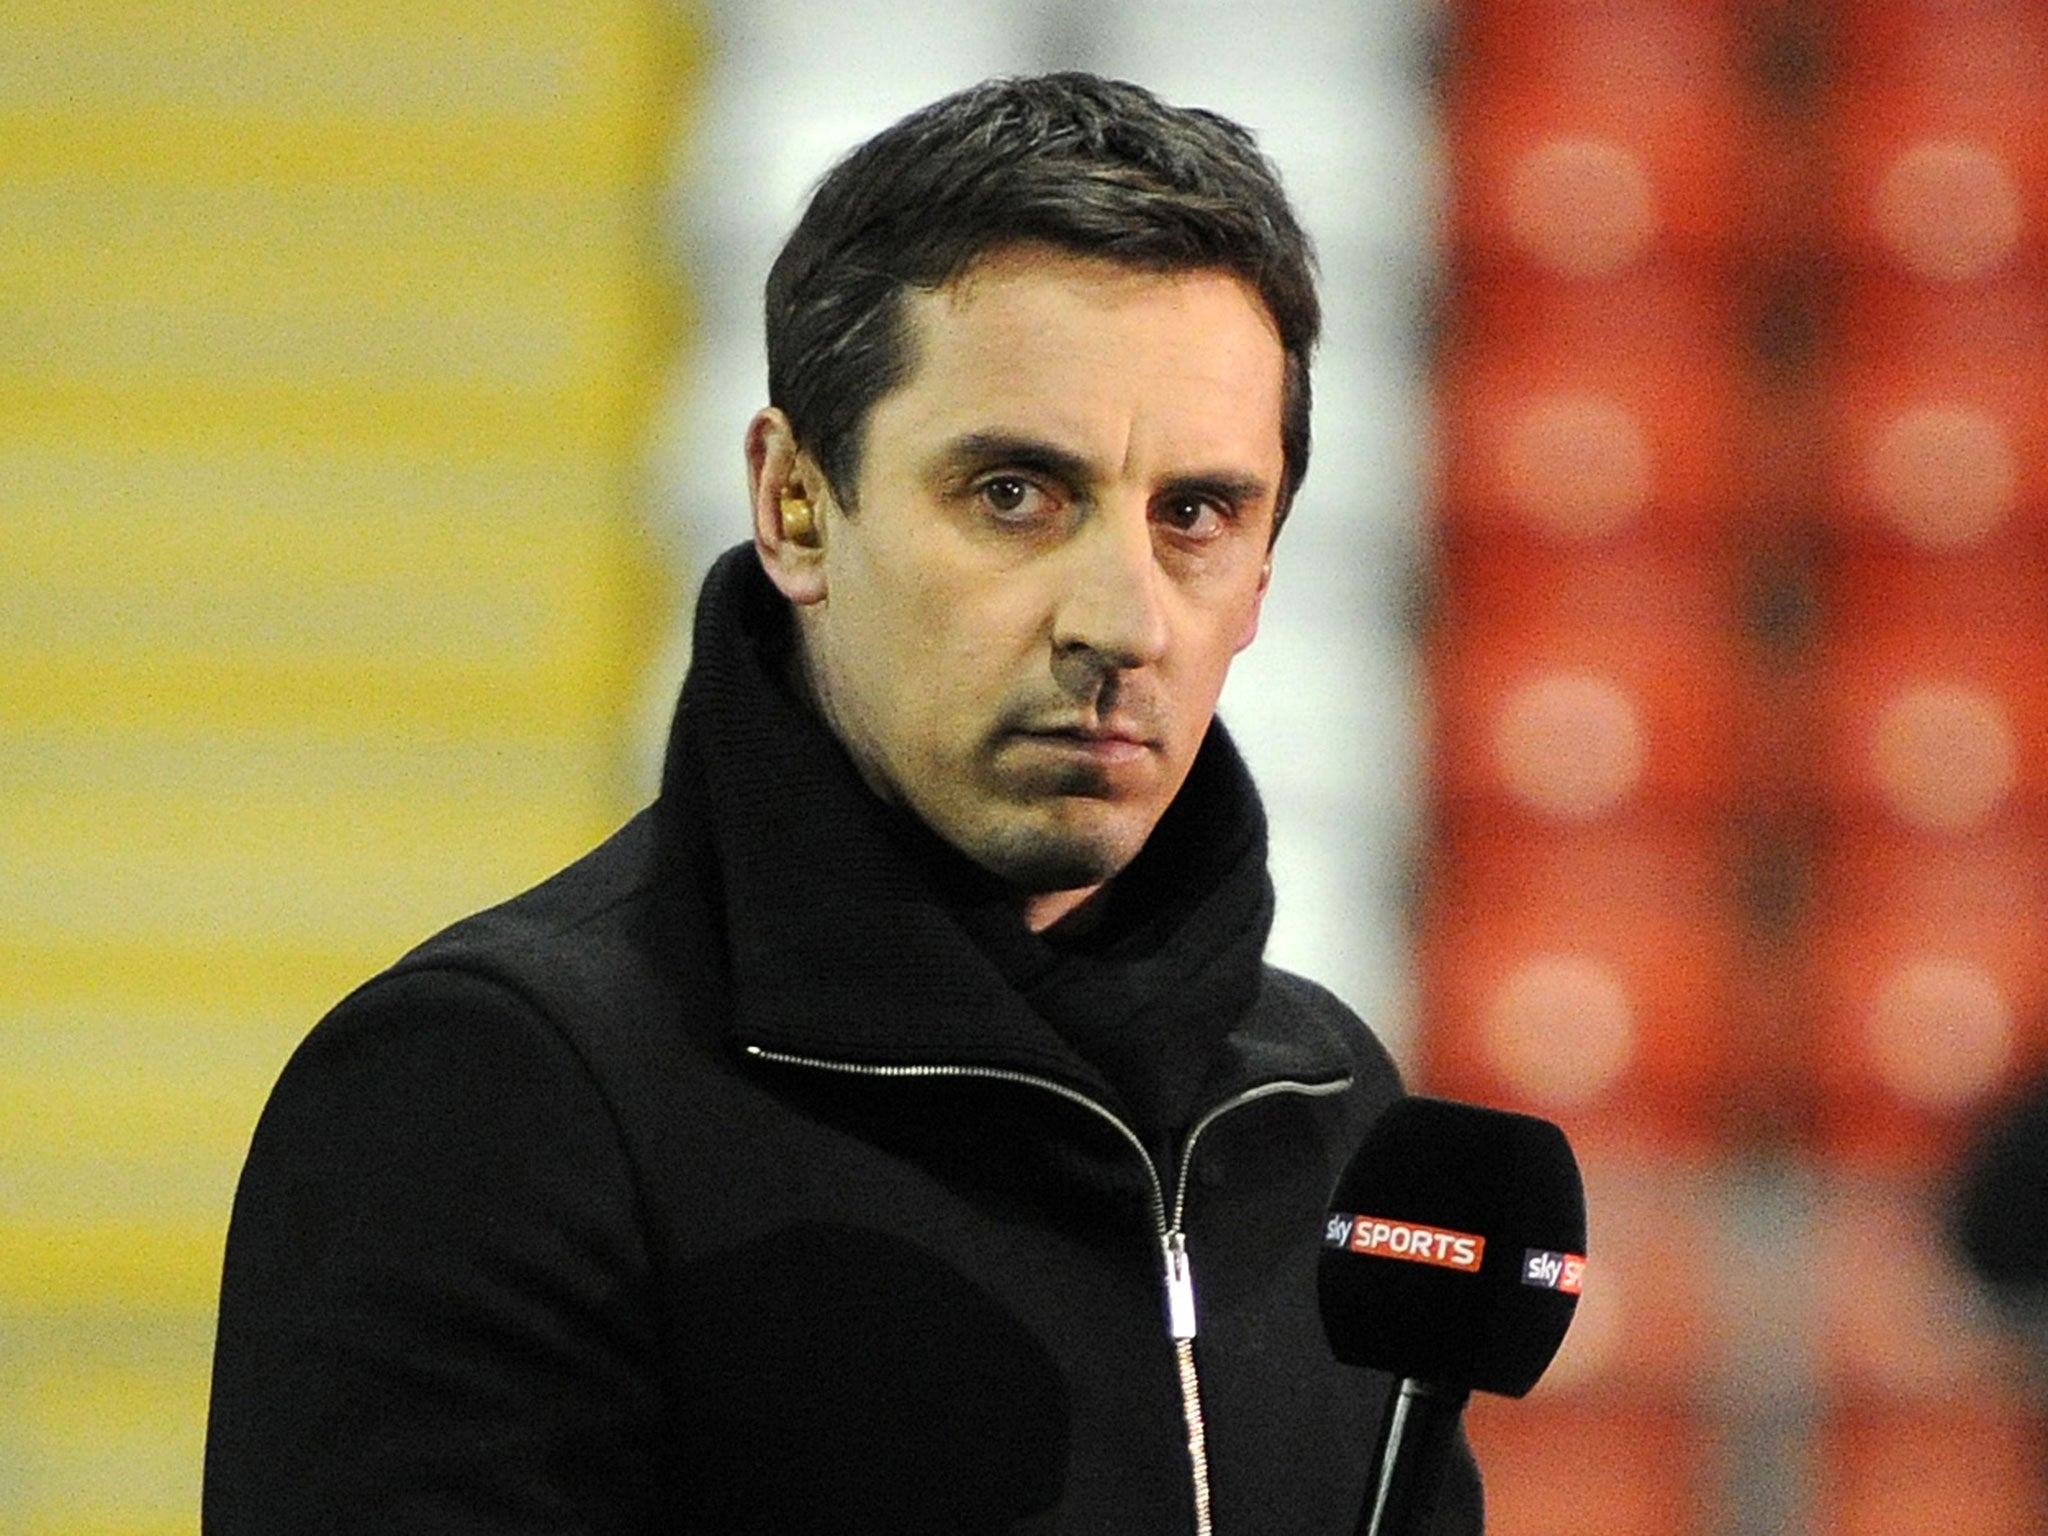 Gary Neville working as a pundit for Sky